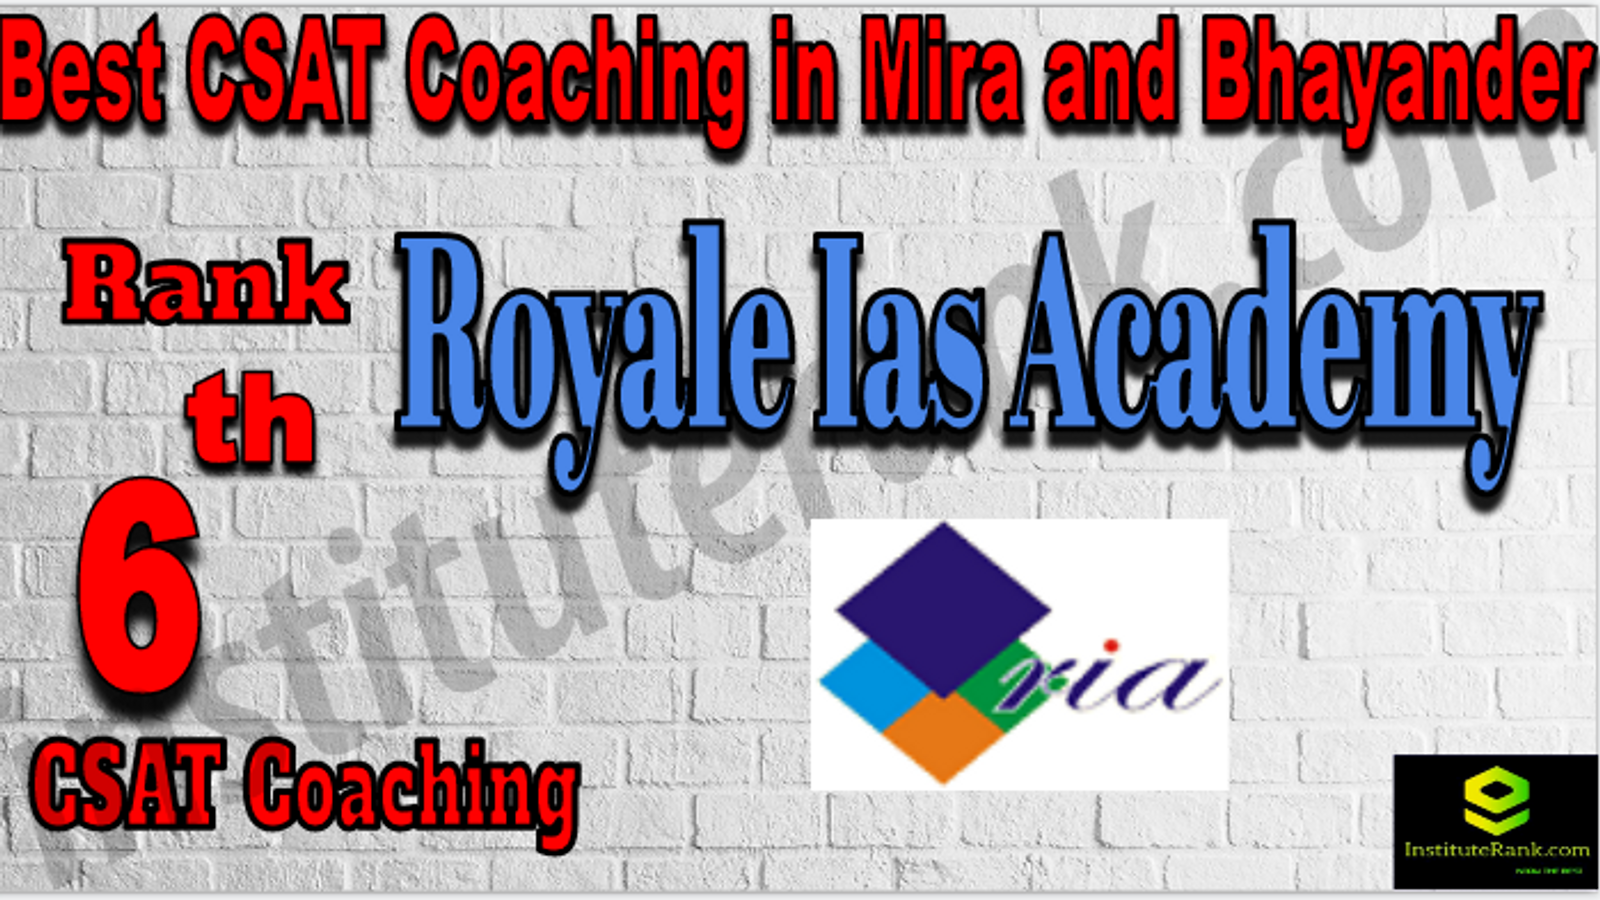 6TH CSAT Coaching in Mira and Bhayander